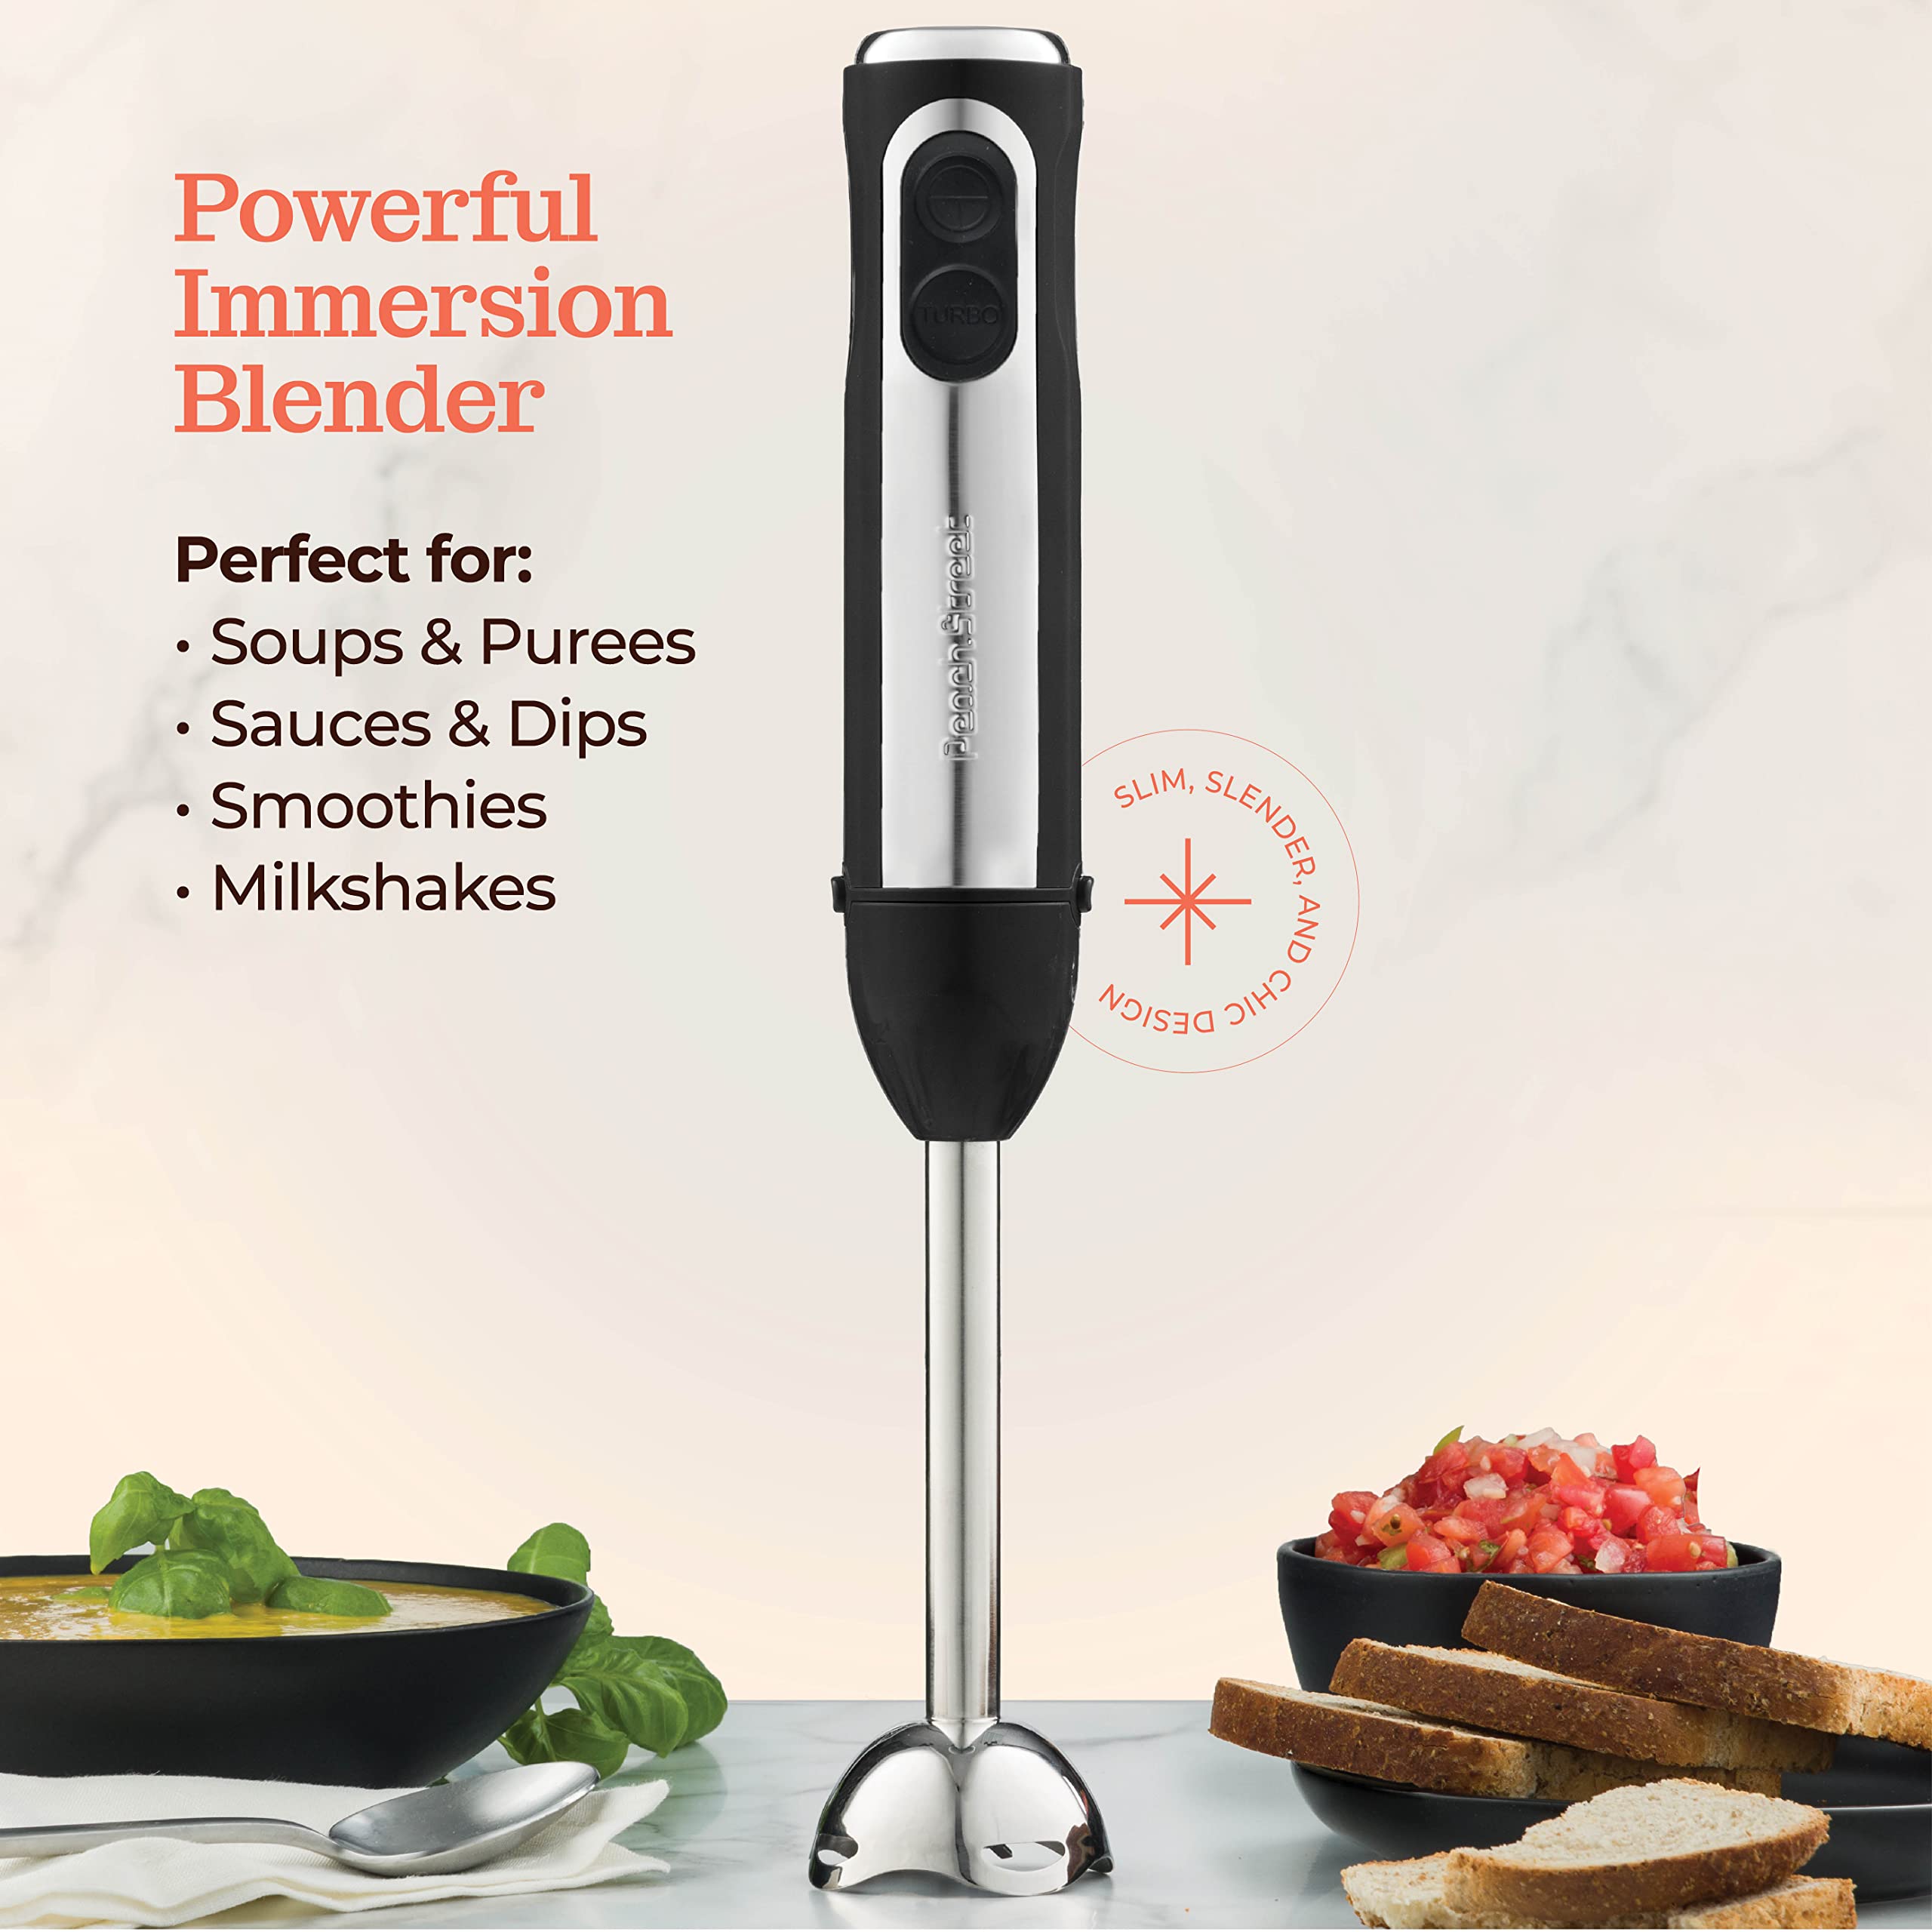 Powerful Immersion Blender, Electric Hand Blender 500 Watt with Turbo Mode, Detachable Base. Handheld Kitchen Gadget Blender Stick for Soup, Smoothie, Puree, Baby Food, 304 Stainless Steel Blades (Black)